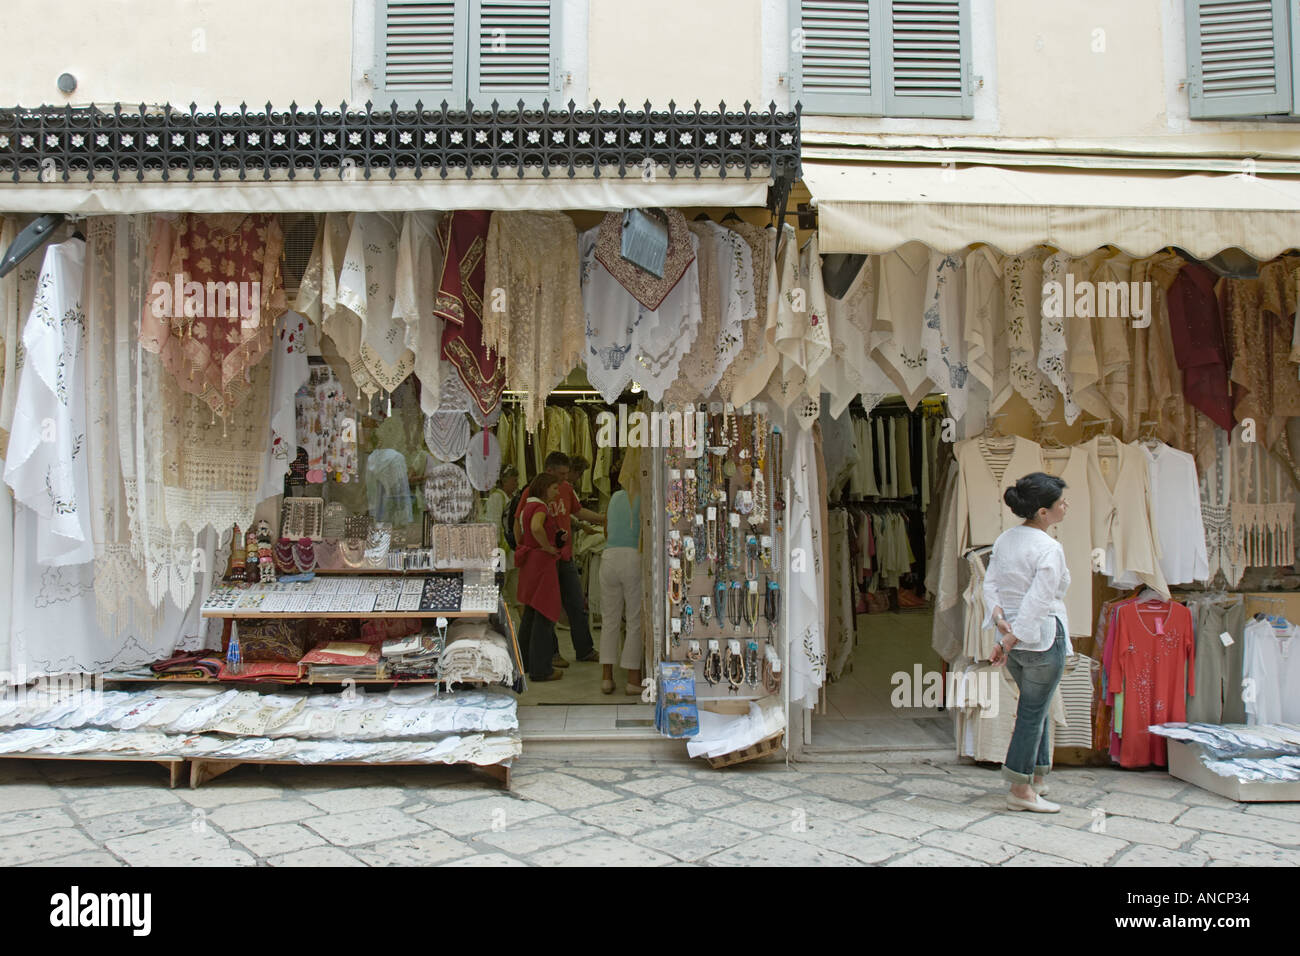 Small shop selling tablecloth and souvenirs in Kerkyra old town. Corfu island, Greece. Stock Photo